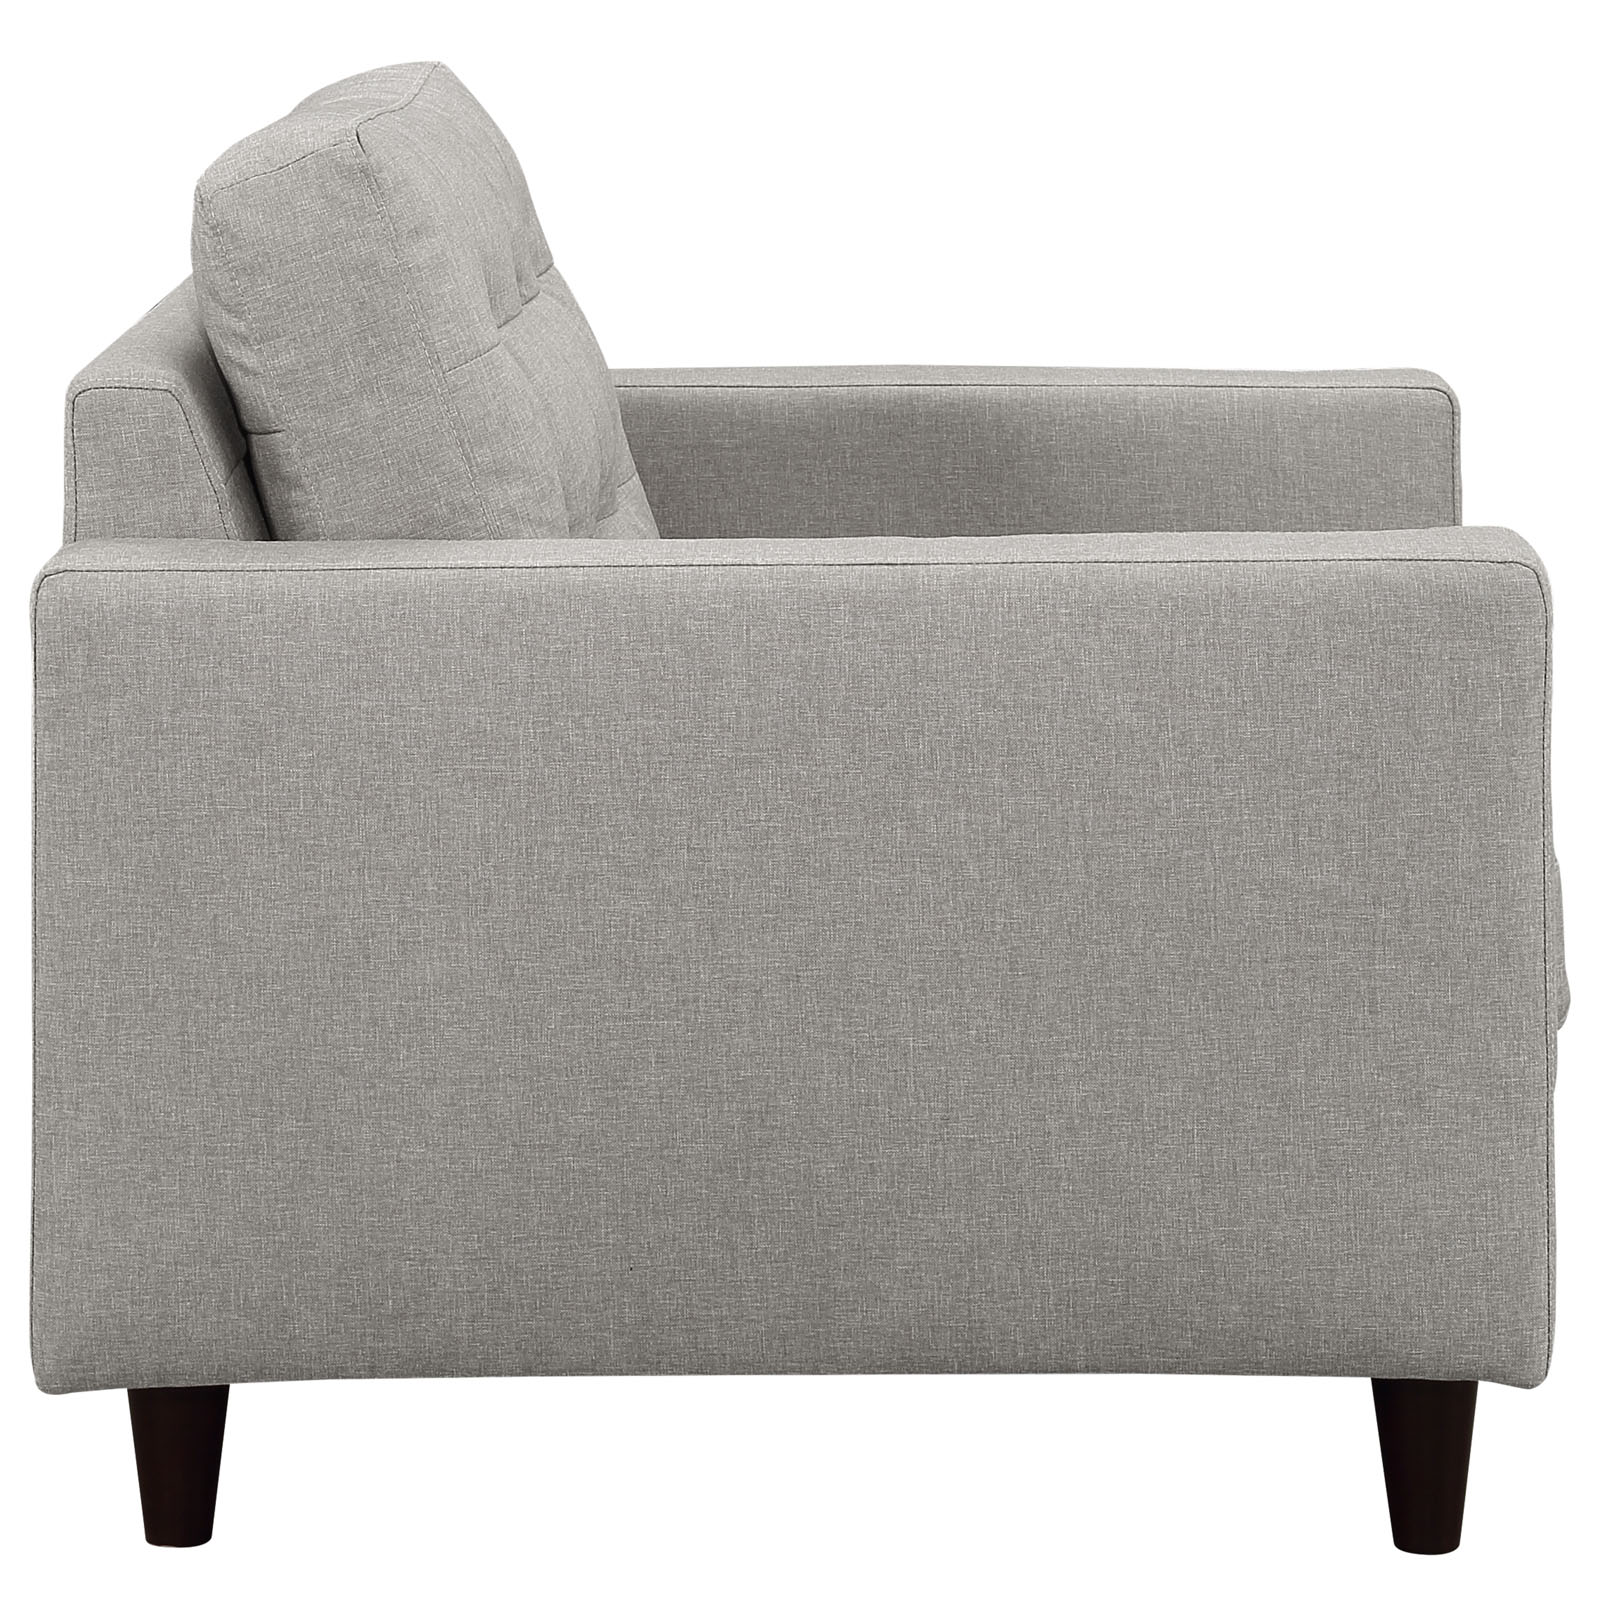 Modway Empress Upholstered Fabric Armchair in Light Gray - image 4 of 5